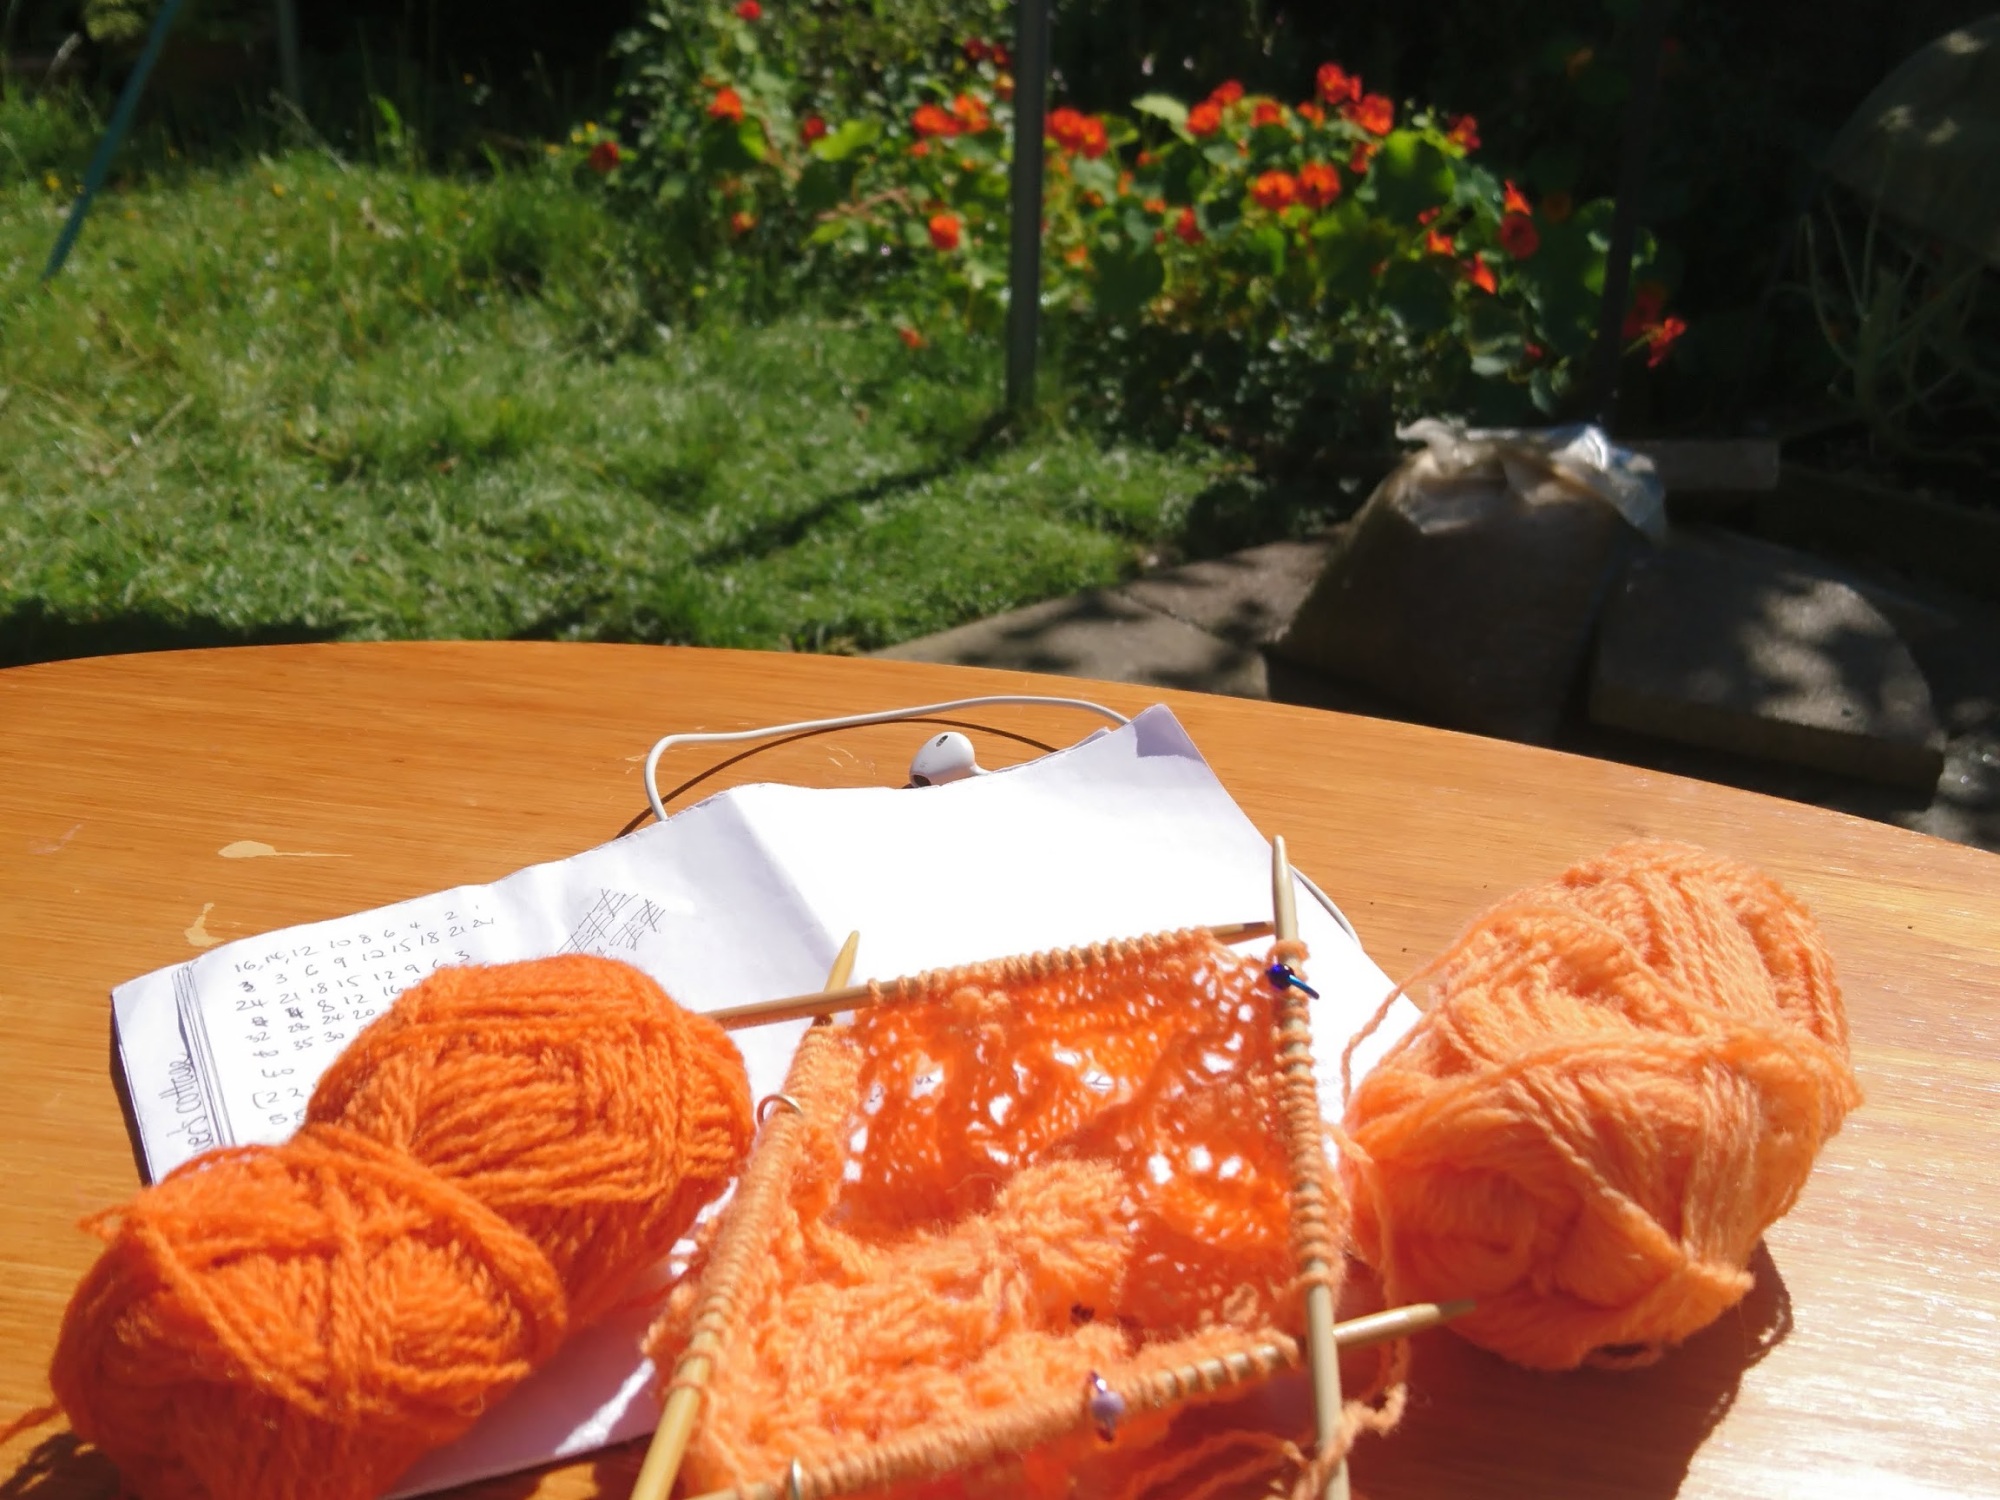 Knitting in the garden with flowers in the background